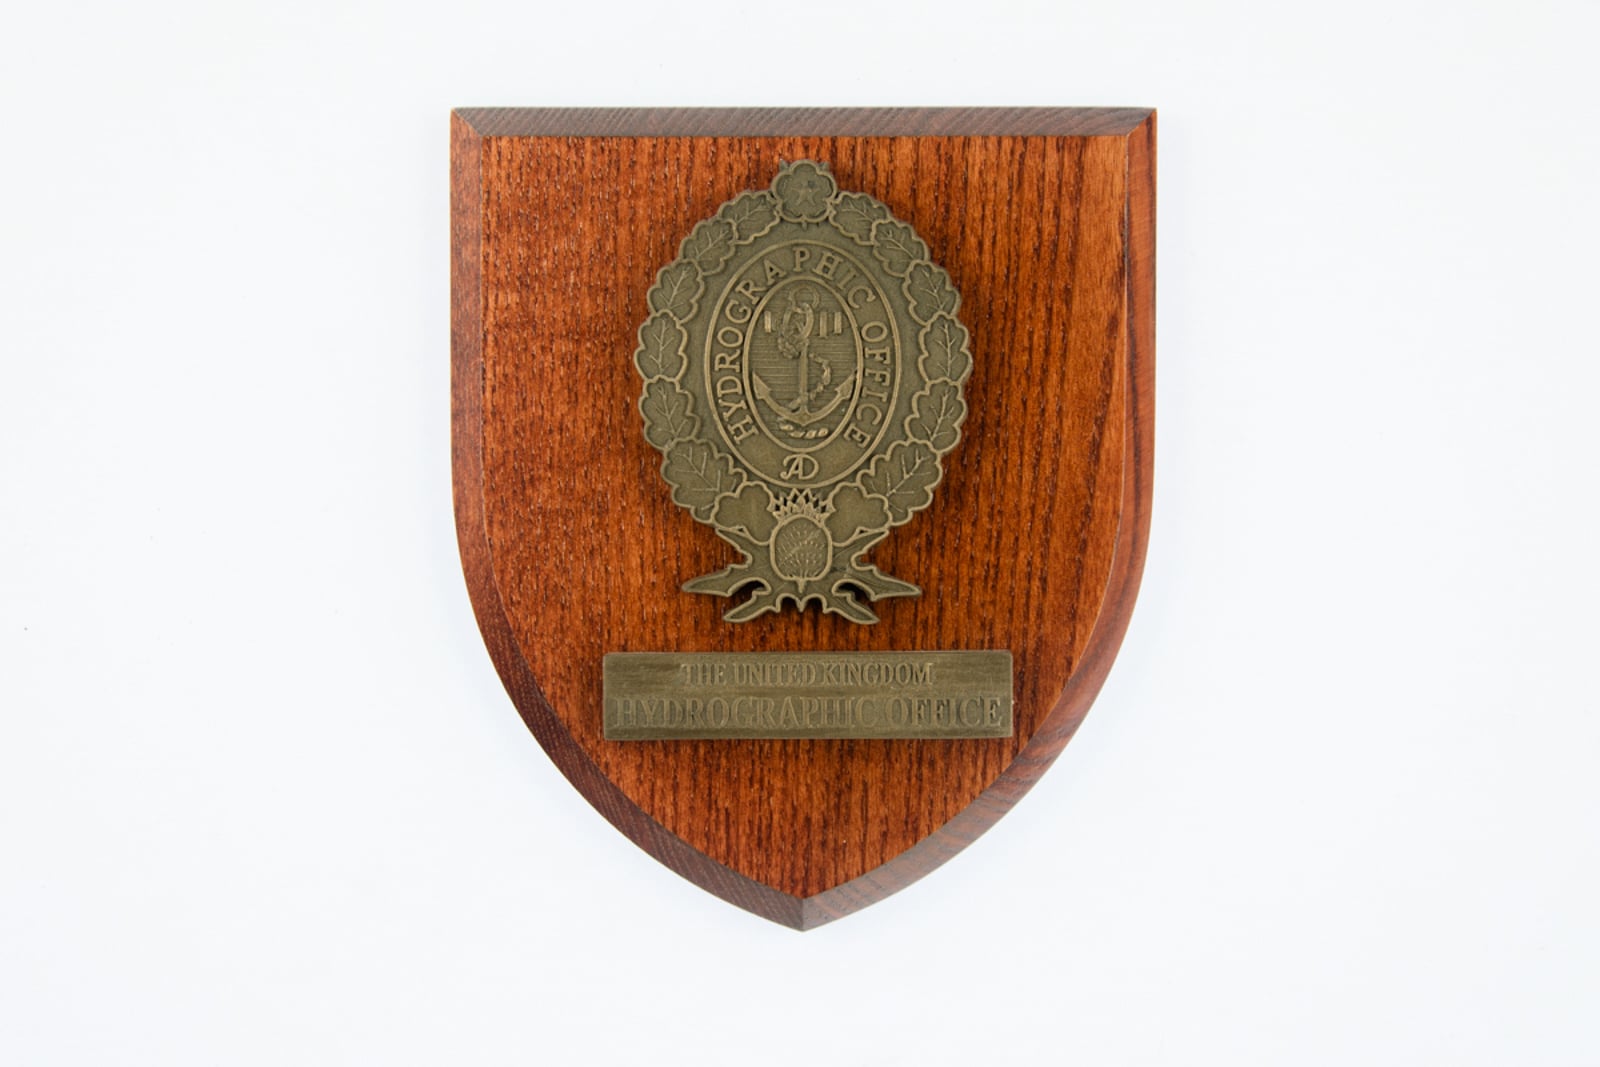 The United Kingdom Hydrographic Office Plaque